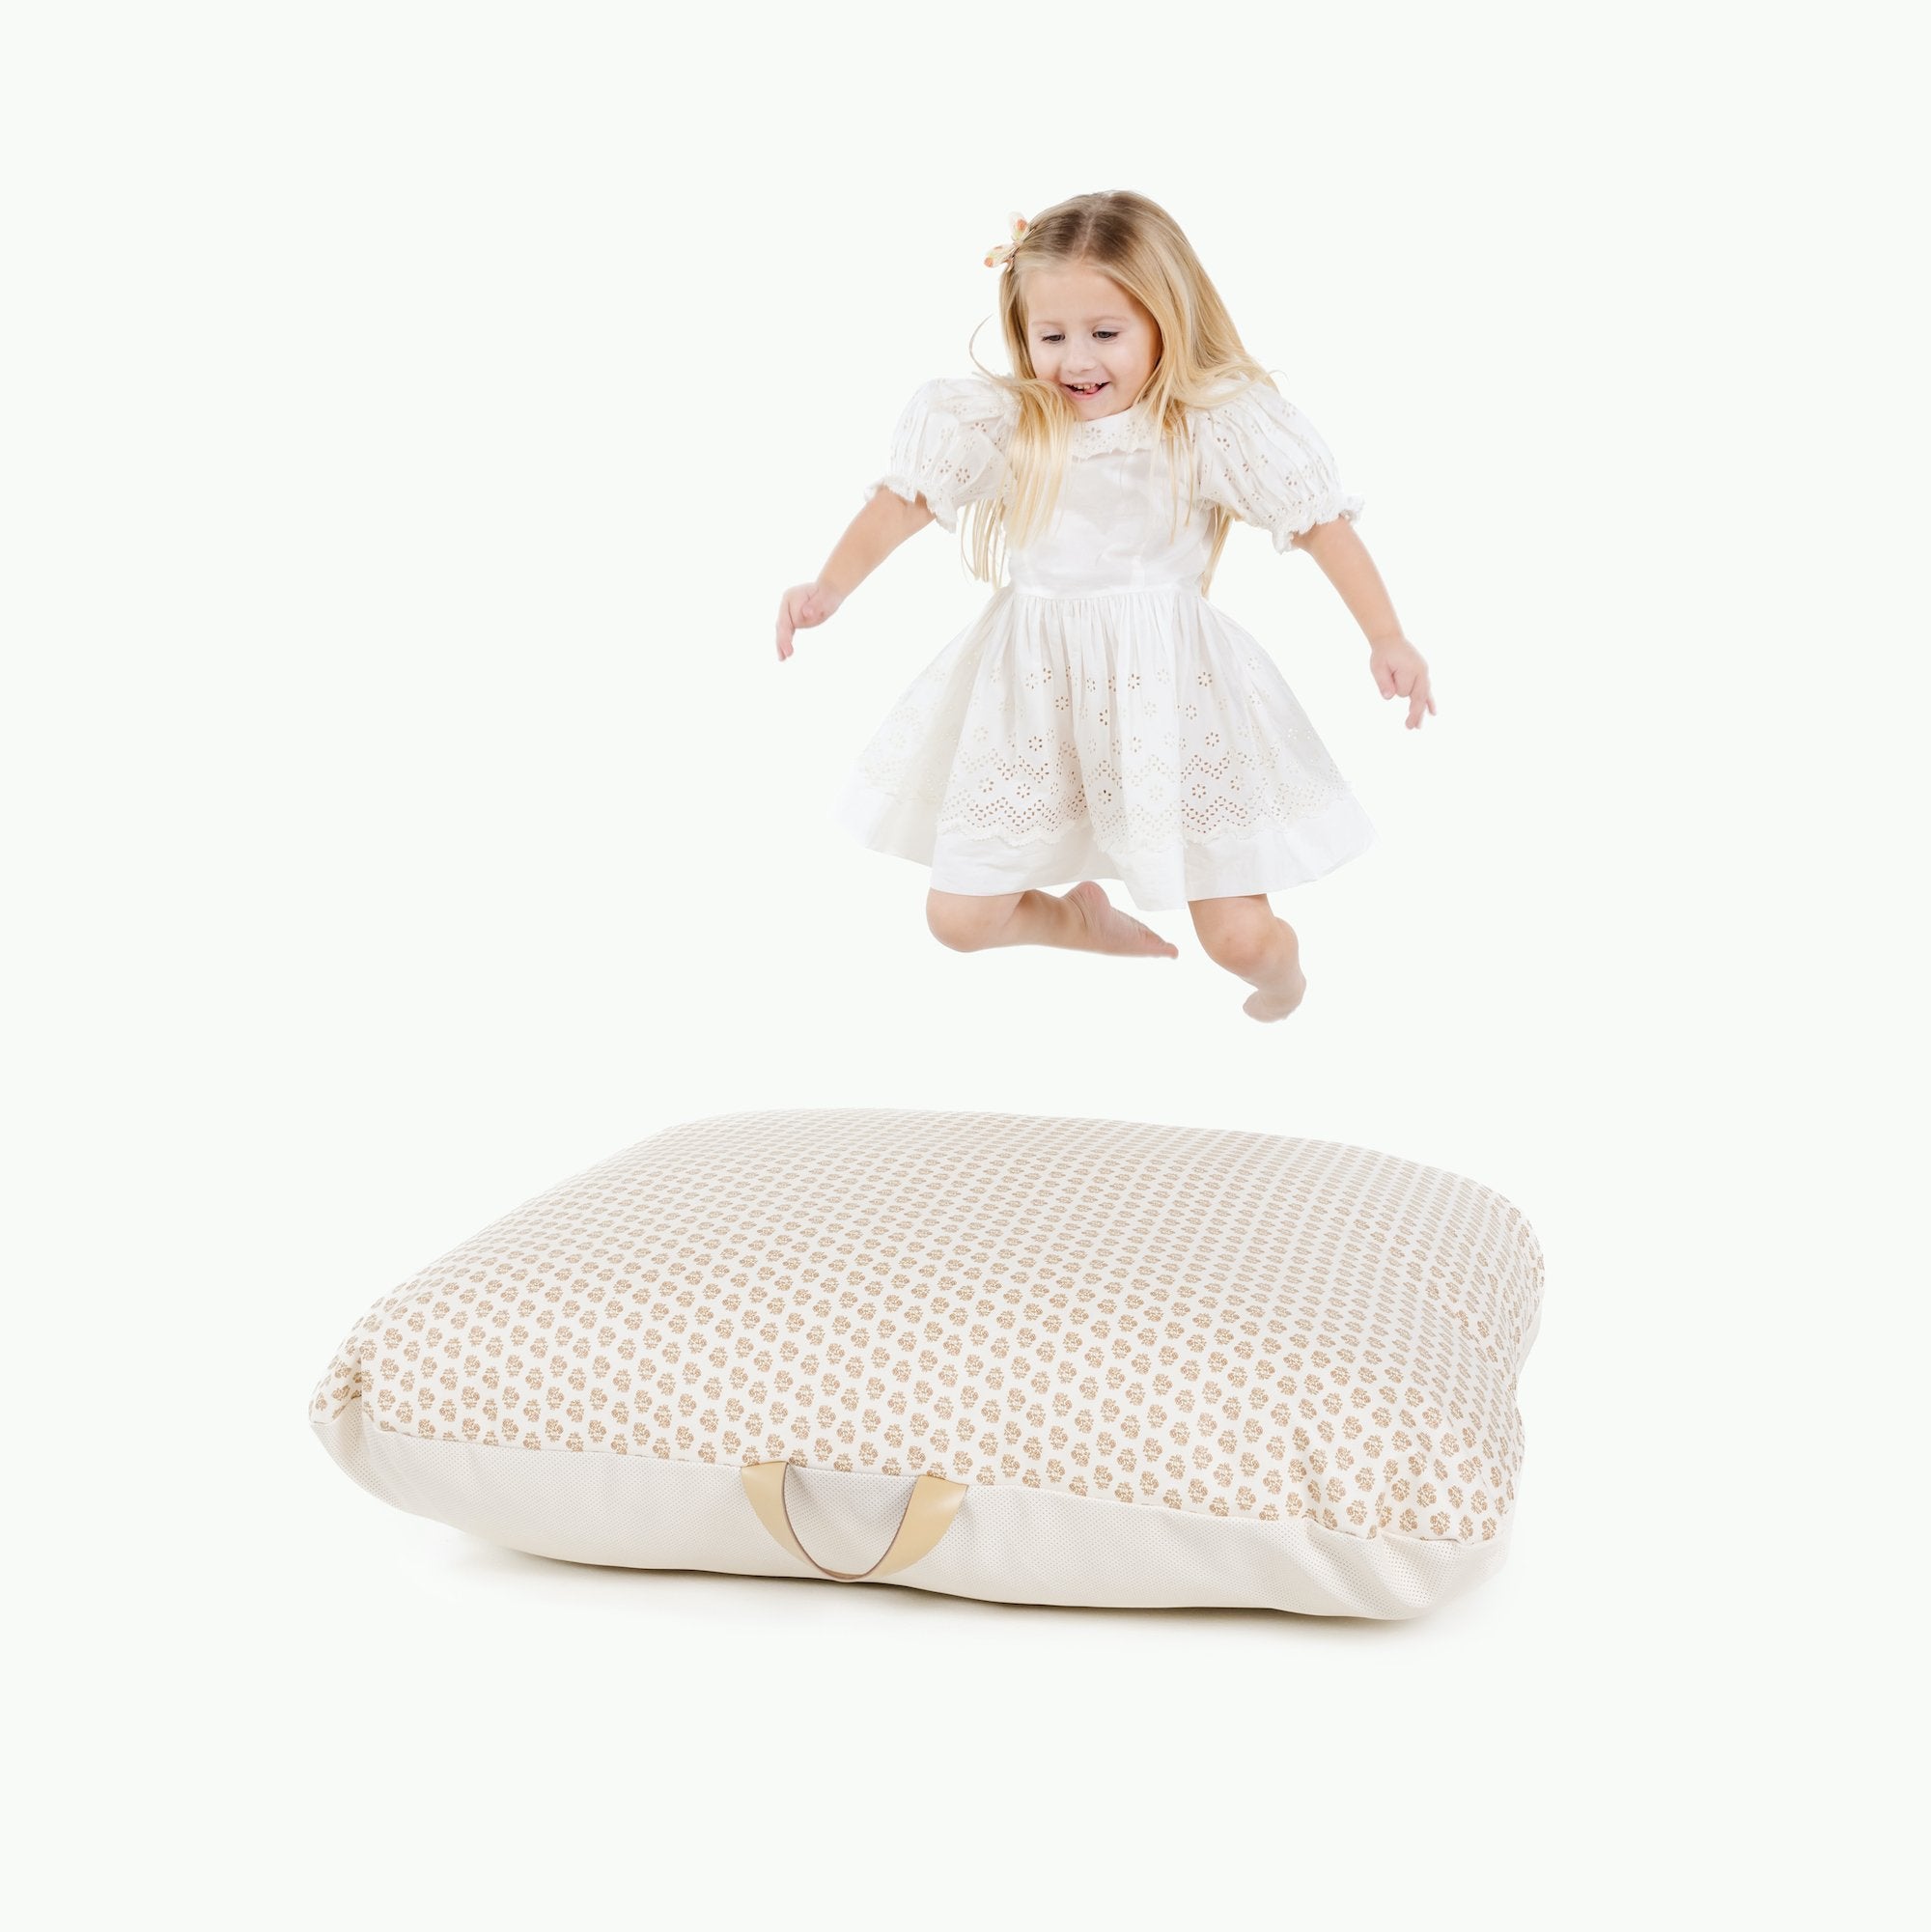 Bloom (on sale) / Square@Kid jumping onto the Bloom Square Floor Cushion